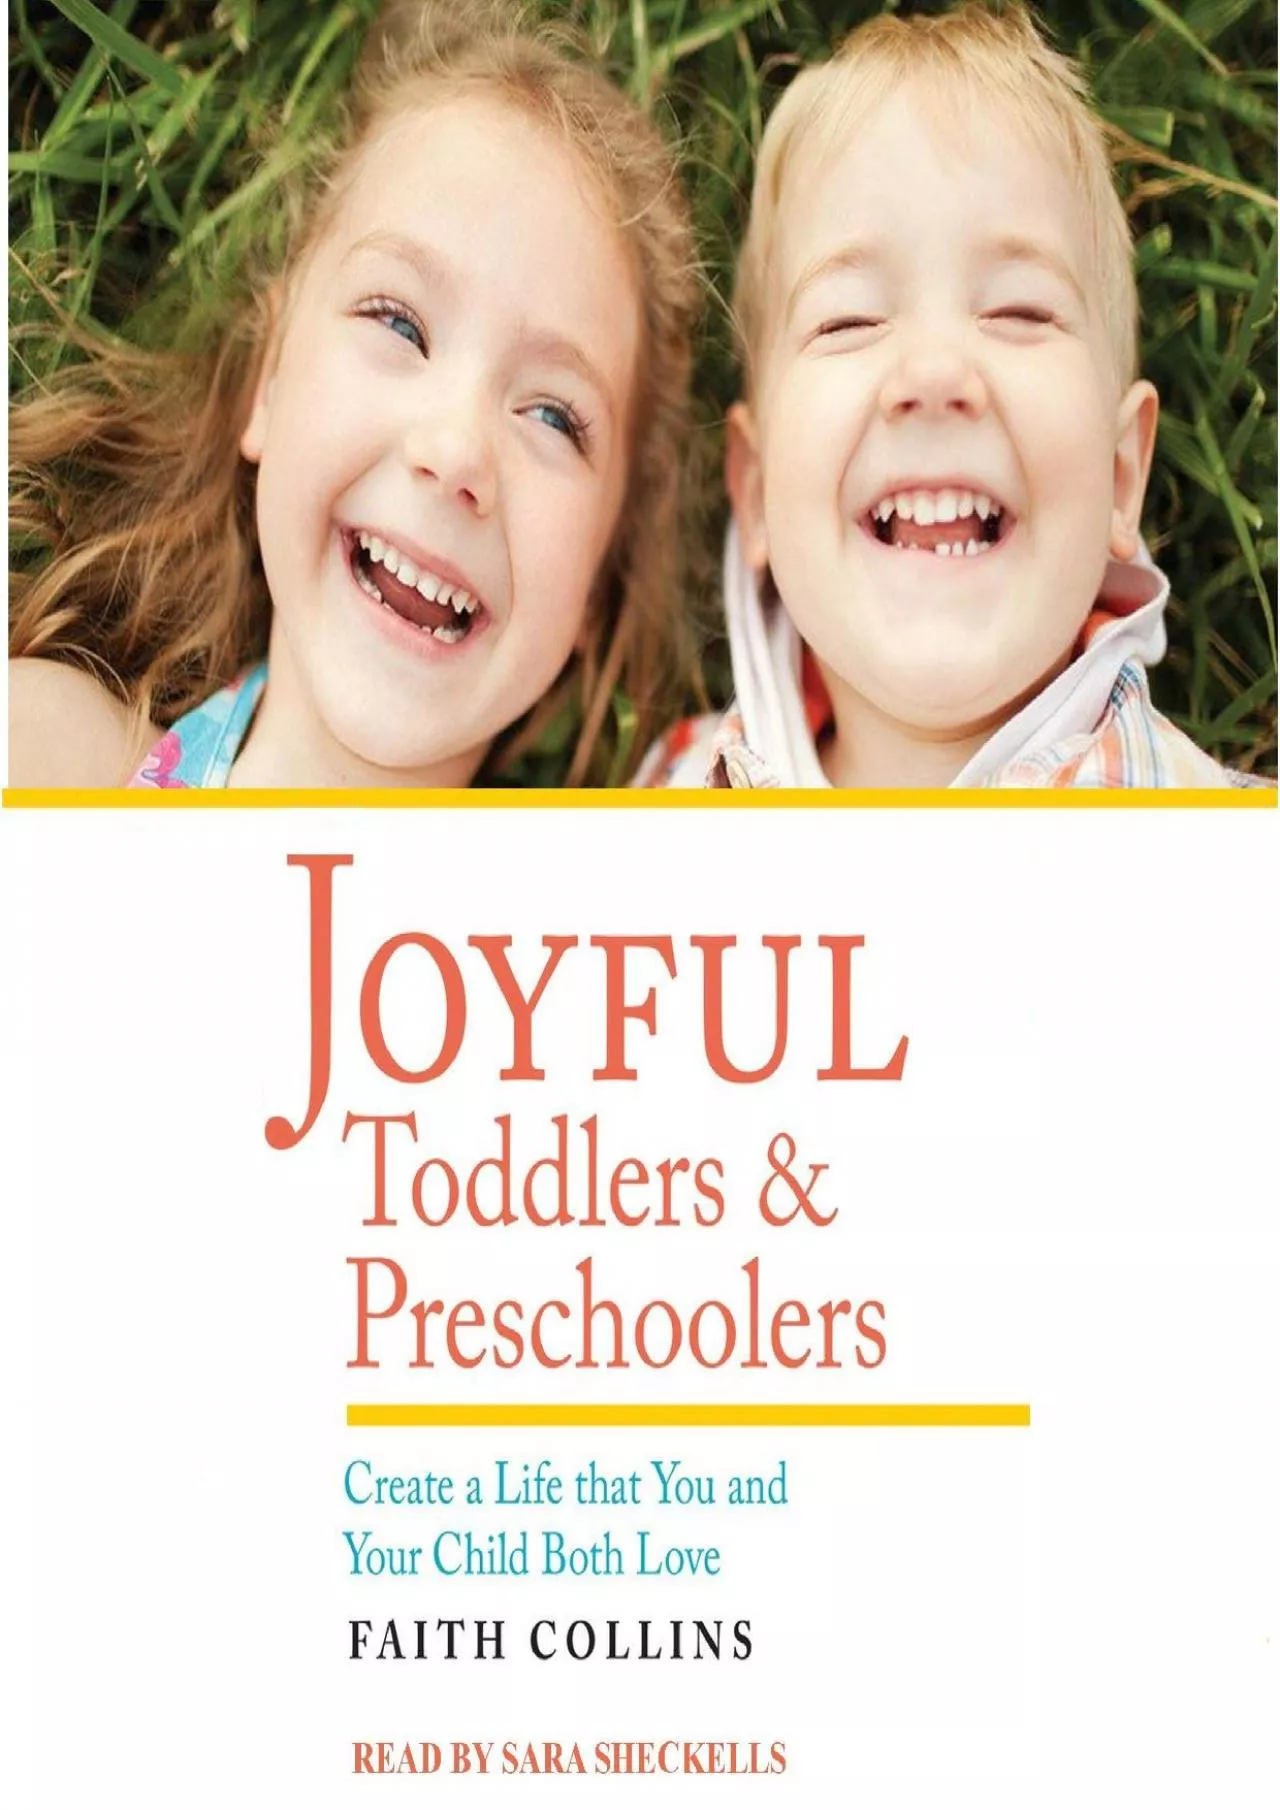 [DOWNLOAD] Joyful Toddlers and Preschoolers: Create a Life that You and Your Child Both